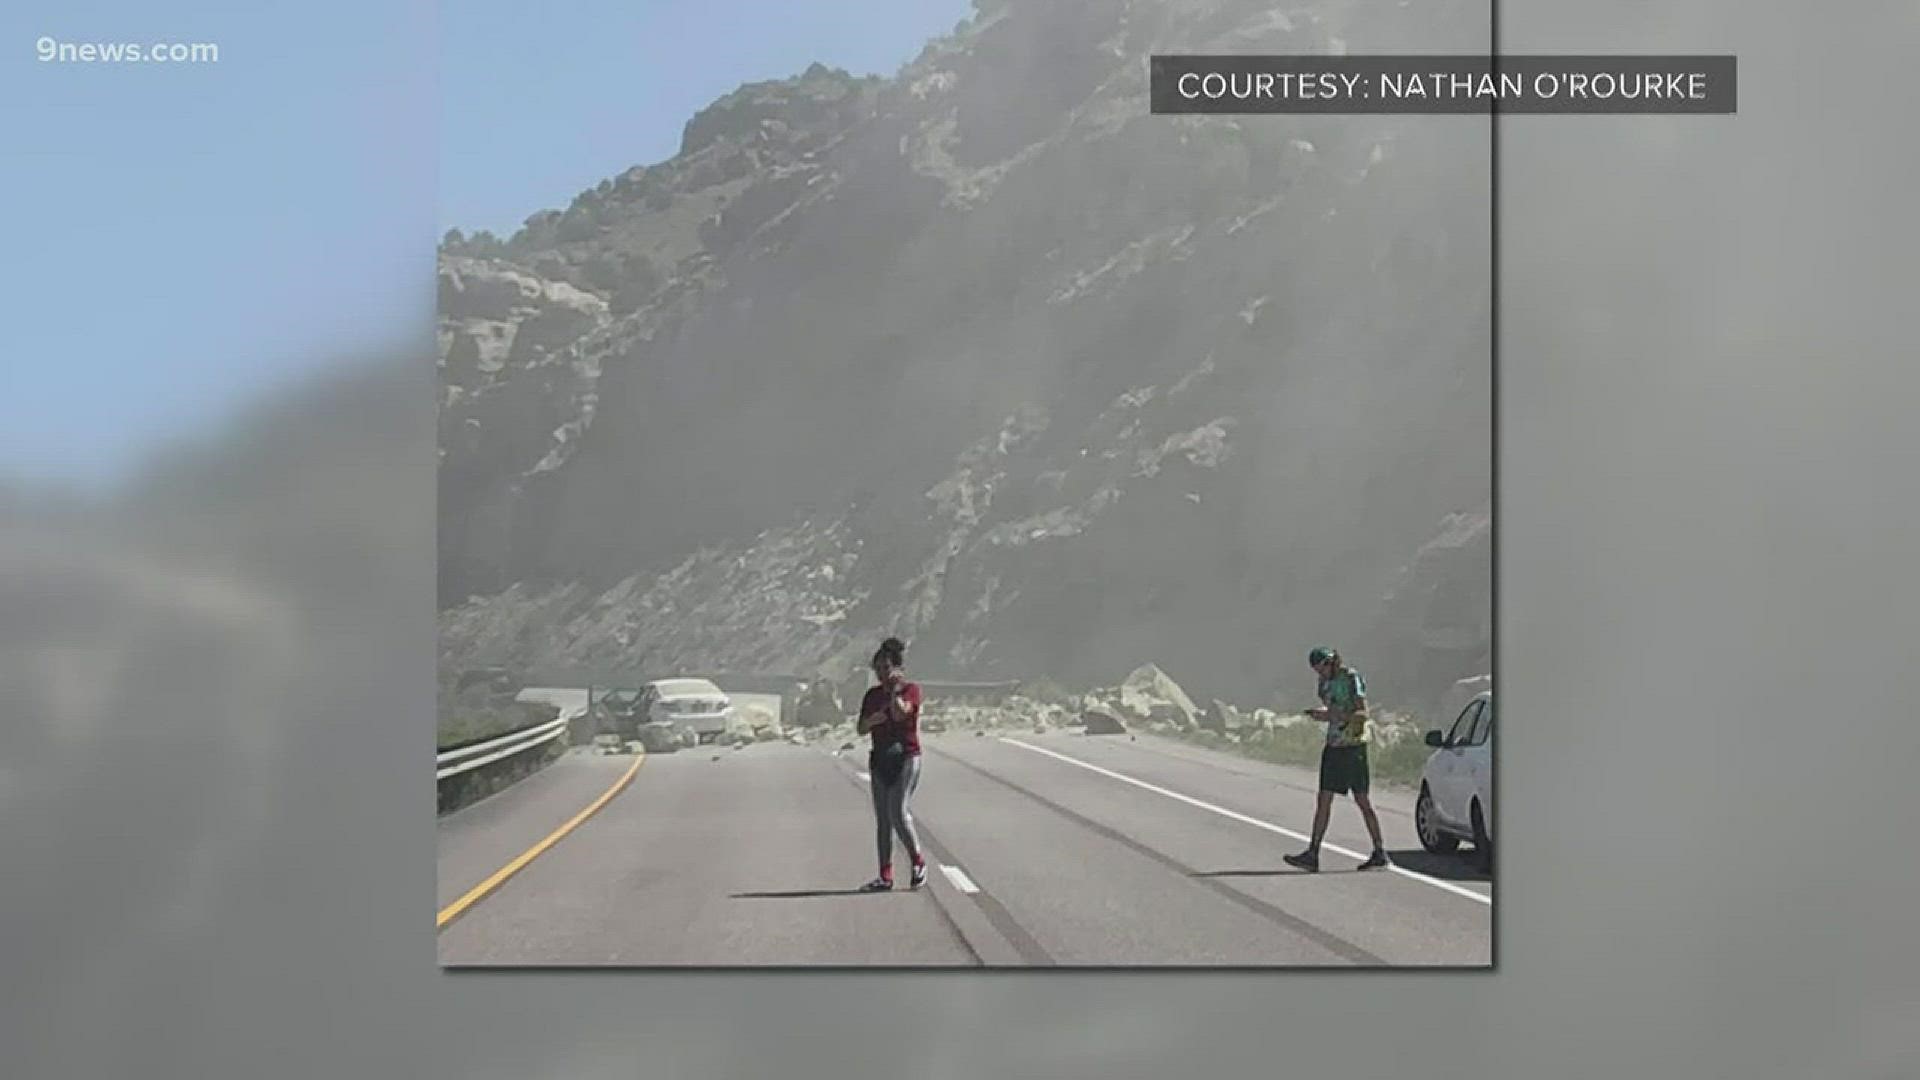 Two women were injured in the rockslide near De Beque, according to the Colorado State Patrol.